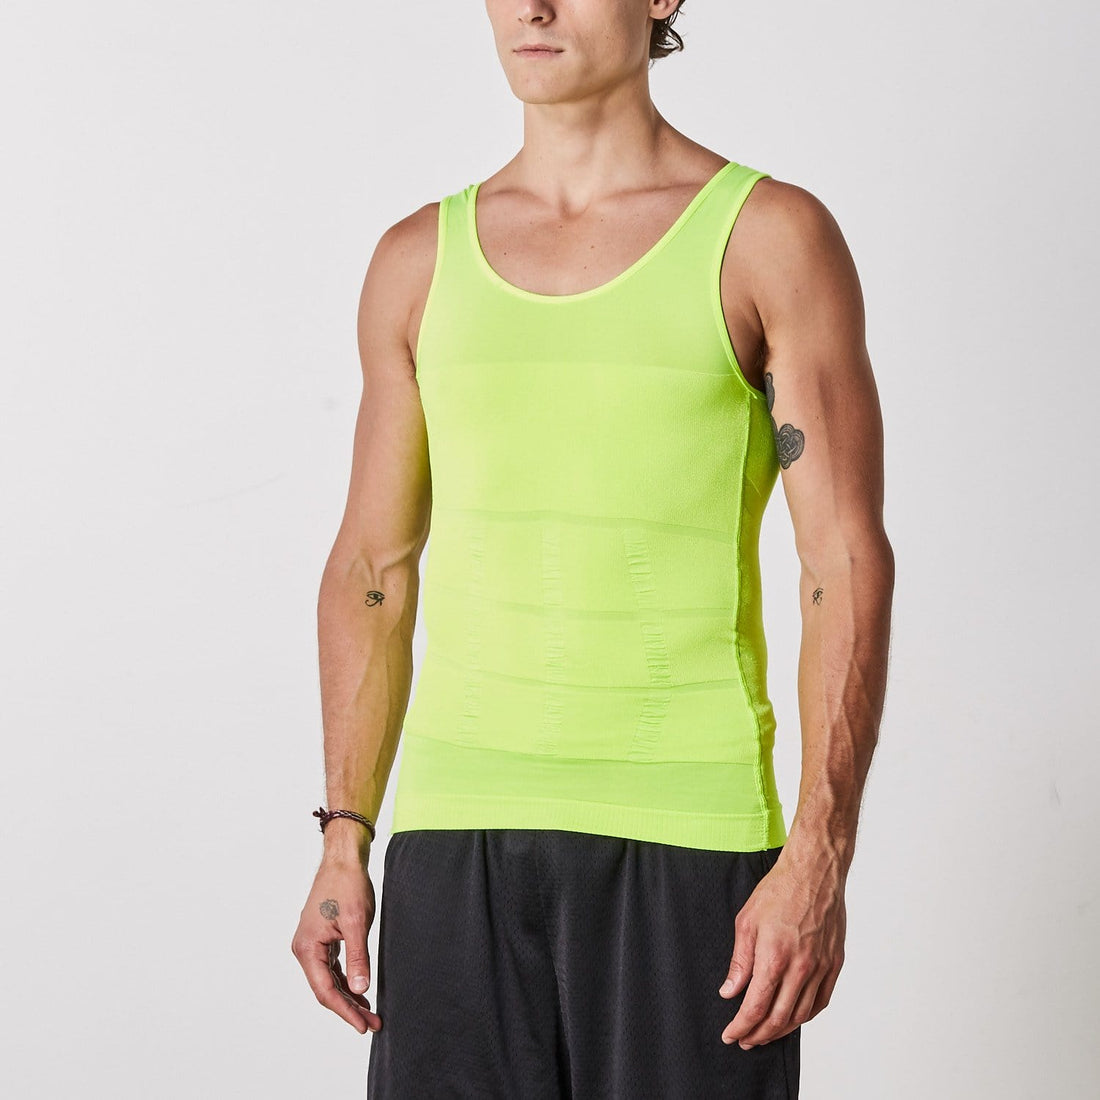 Extreme Fit Men's Core Support and Insta Trim Shapewear Gynecomastia  Compression Tank Top Undershirt, Lime, Small